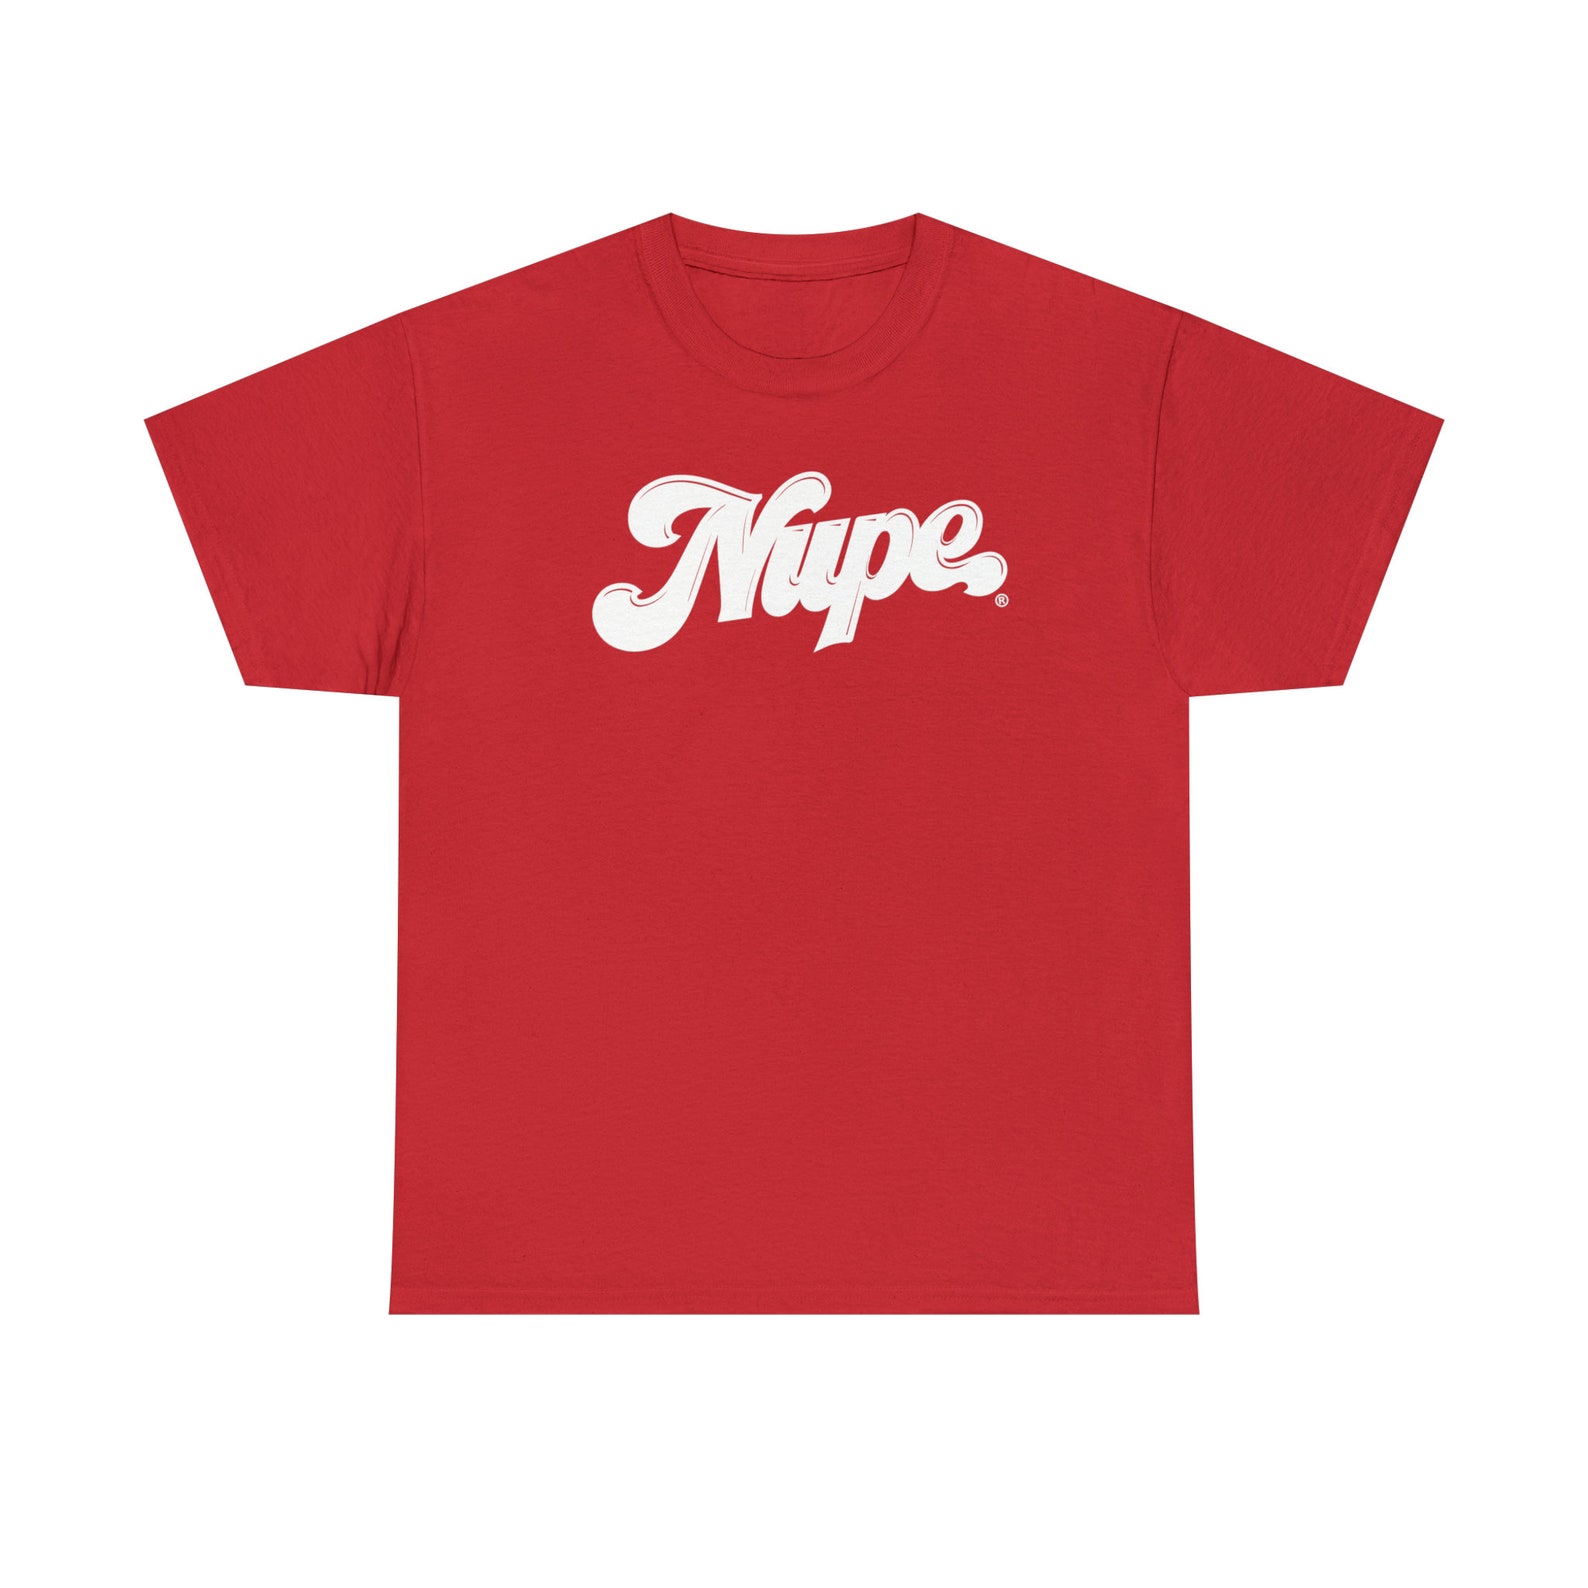 Nupe ® 70s Style T-shirt Kappa Alpha Psi T-shirt Nupe - Etsy